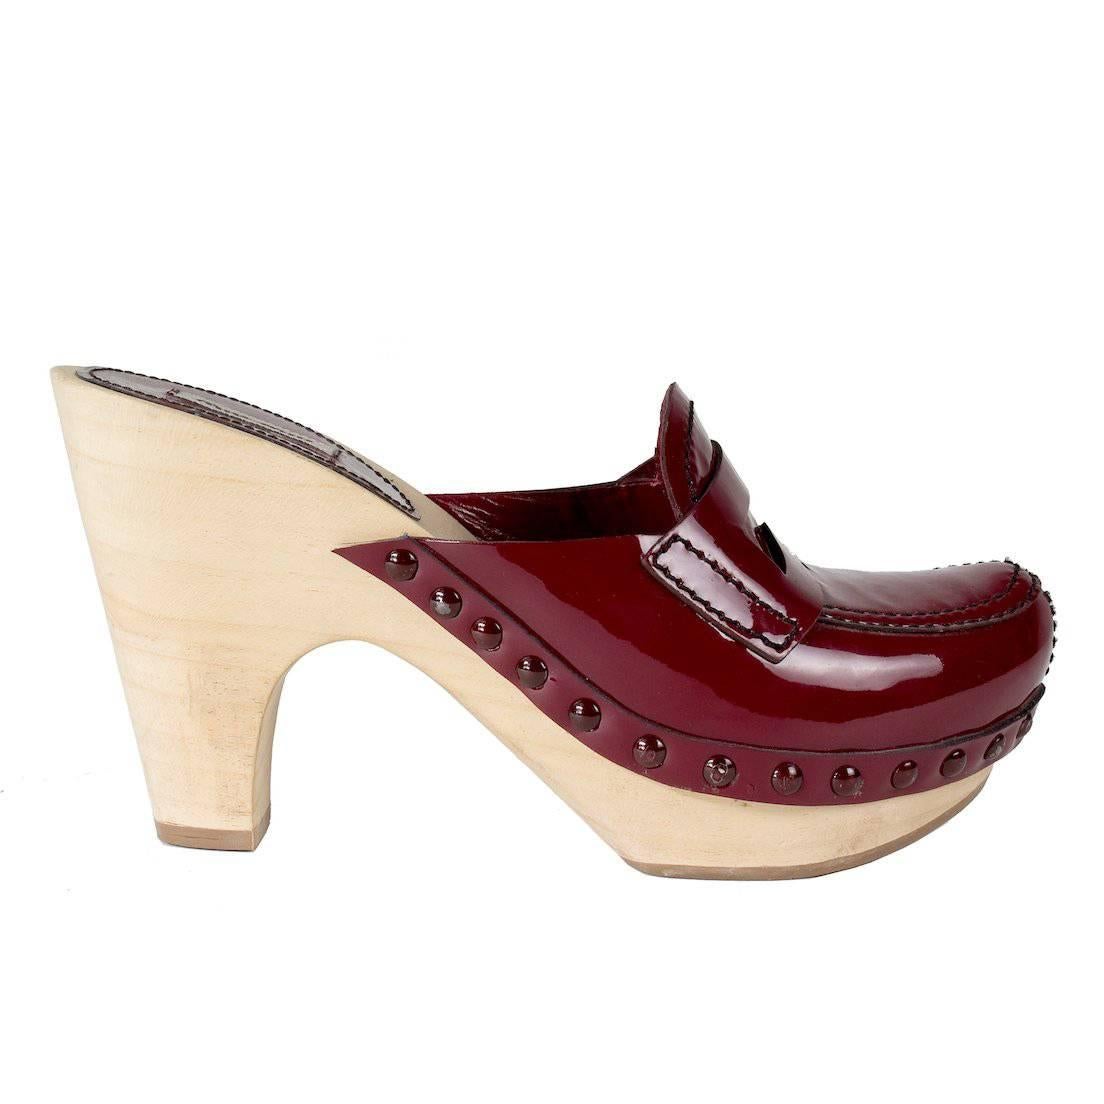 Miu Miu Lightweight Wood Clogs with Red Patent Leather